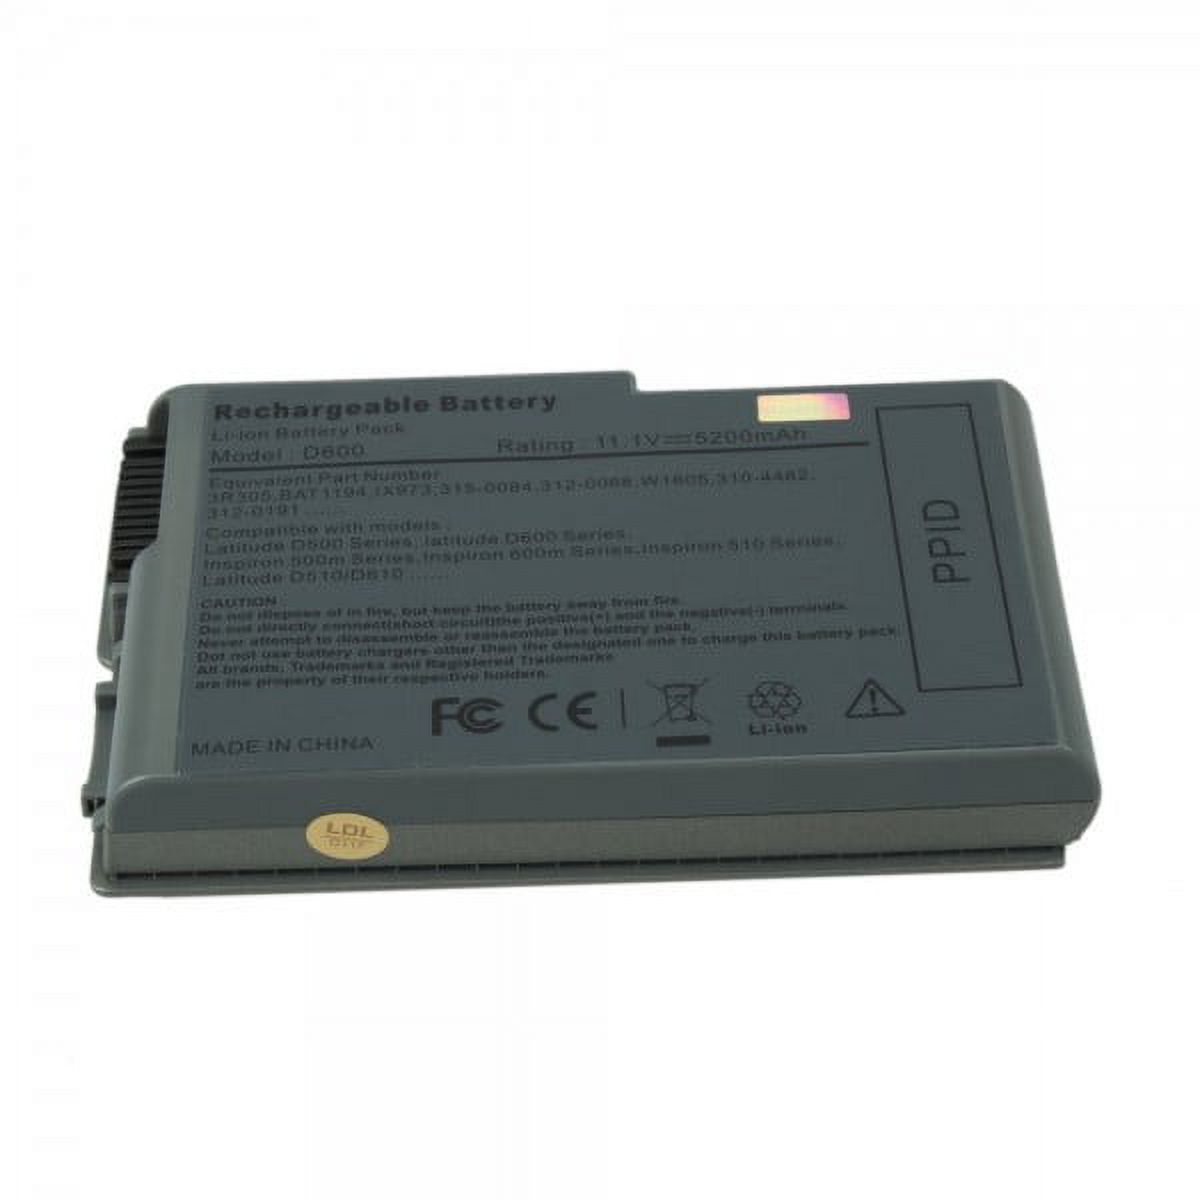 Laptop Battery for Dell Inspiron 500M Series (6-cell, 4400mAh) - image 1 of 1